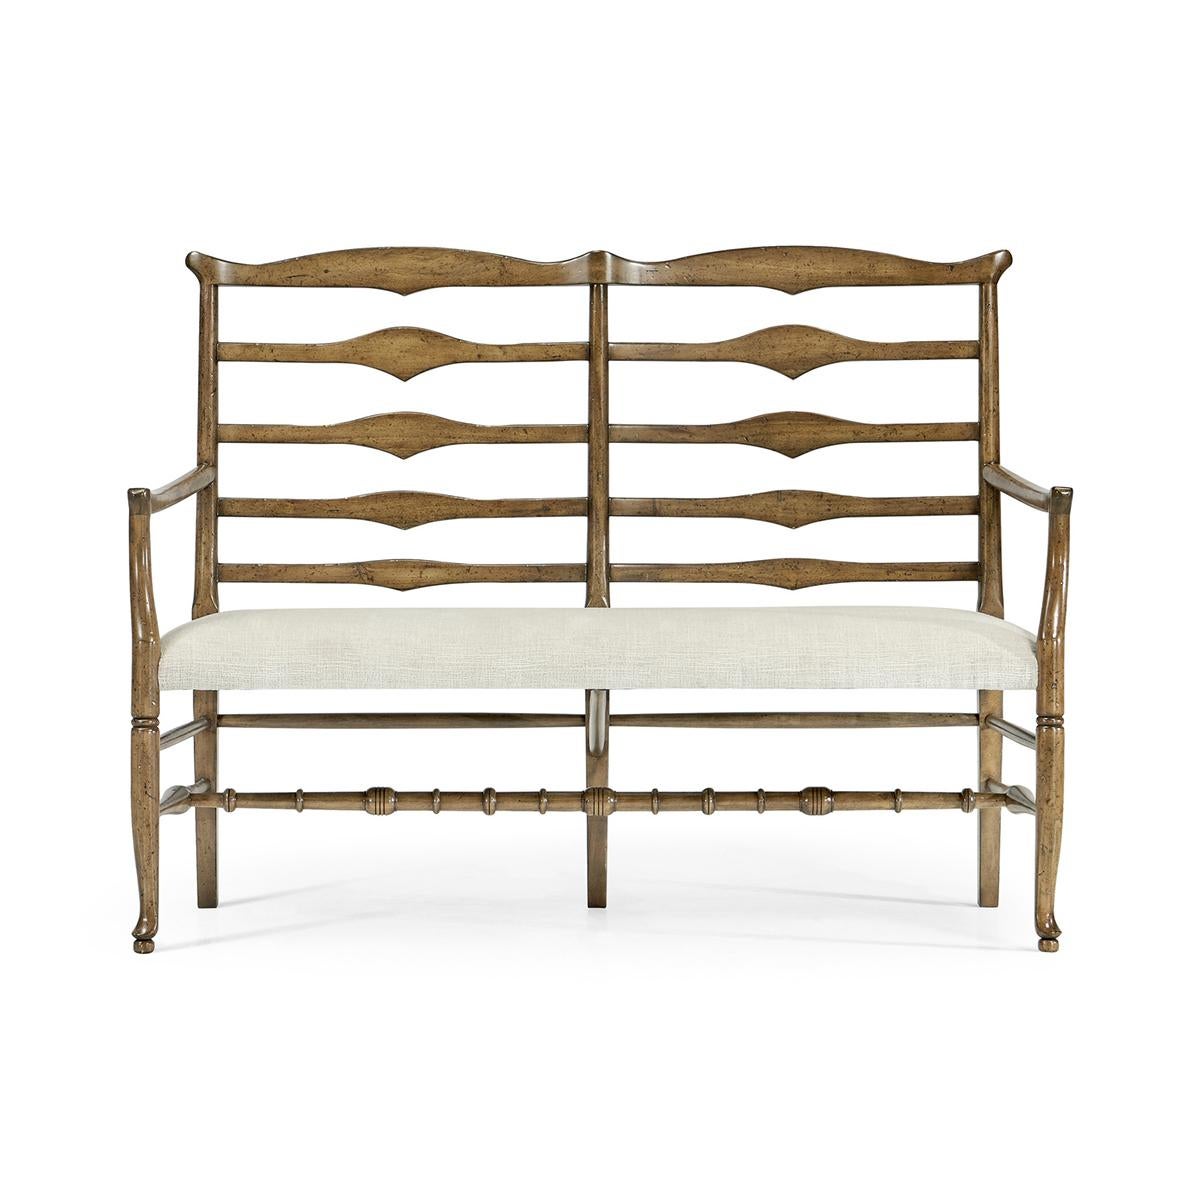 Country Ladder Back Bench, this English country-style medium driftwood ladder back two-seat bench has a shaped back rail, graduated ladder slats with triangular shaping in the center and an upholstered seat. Turned legs and stretchers